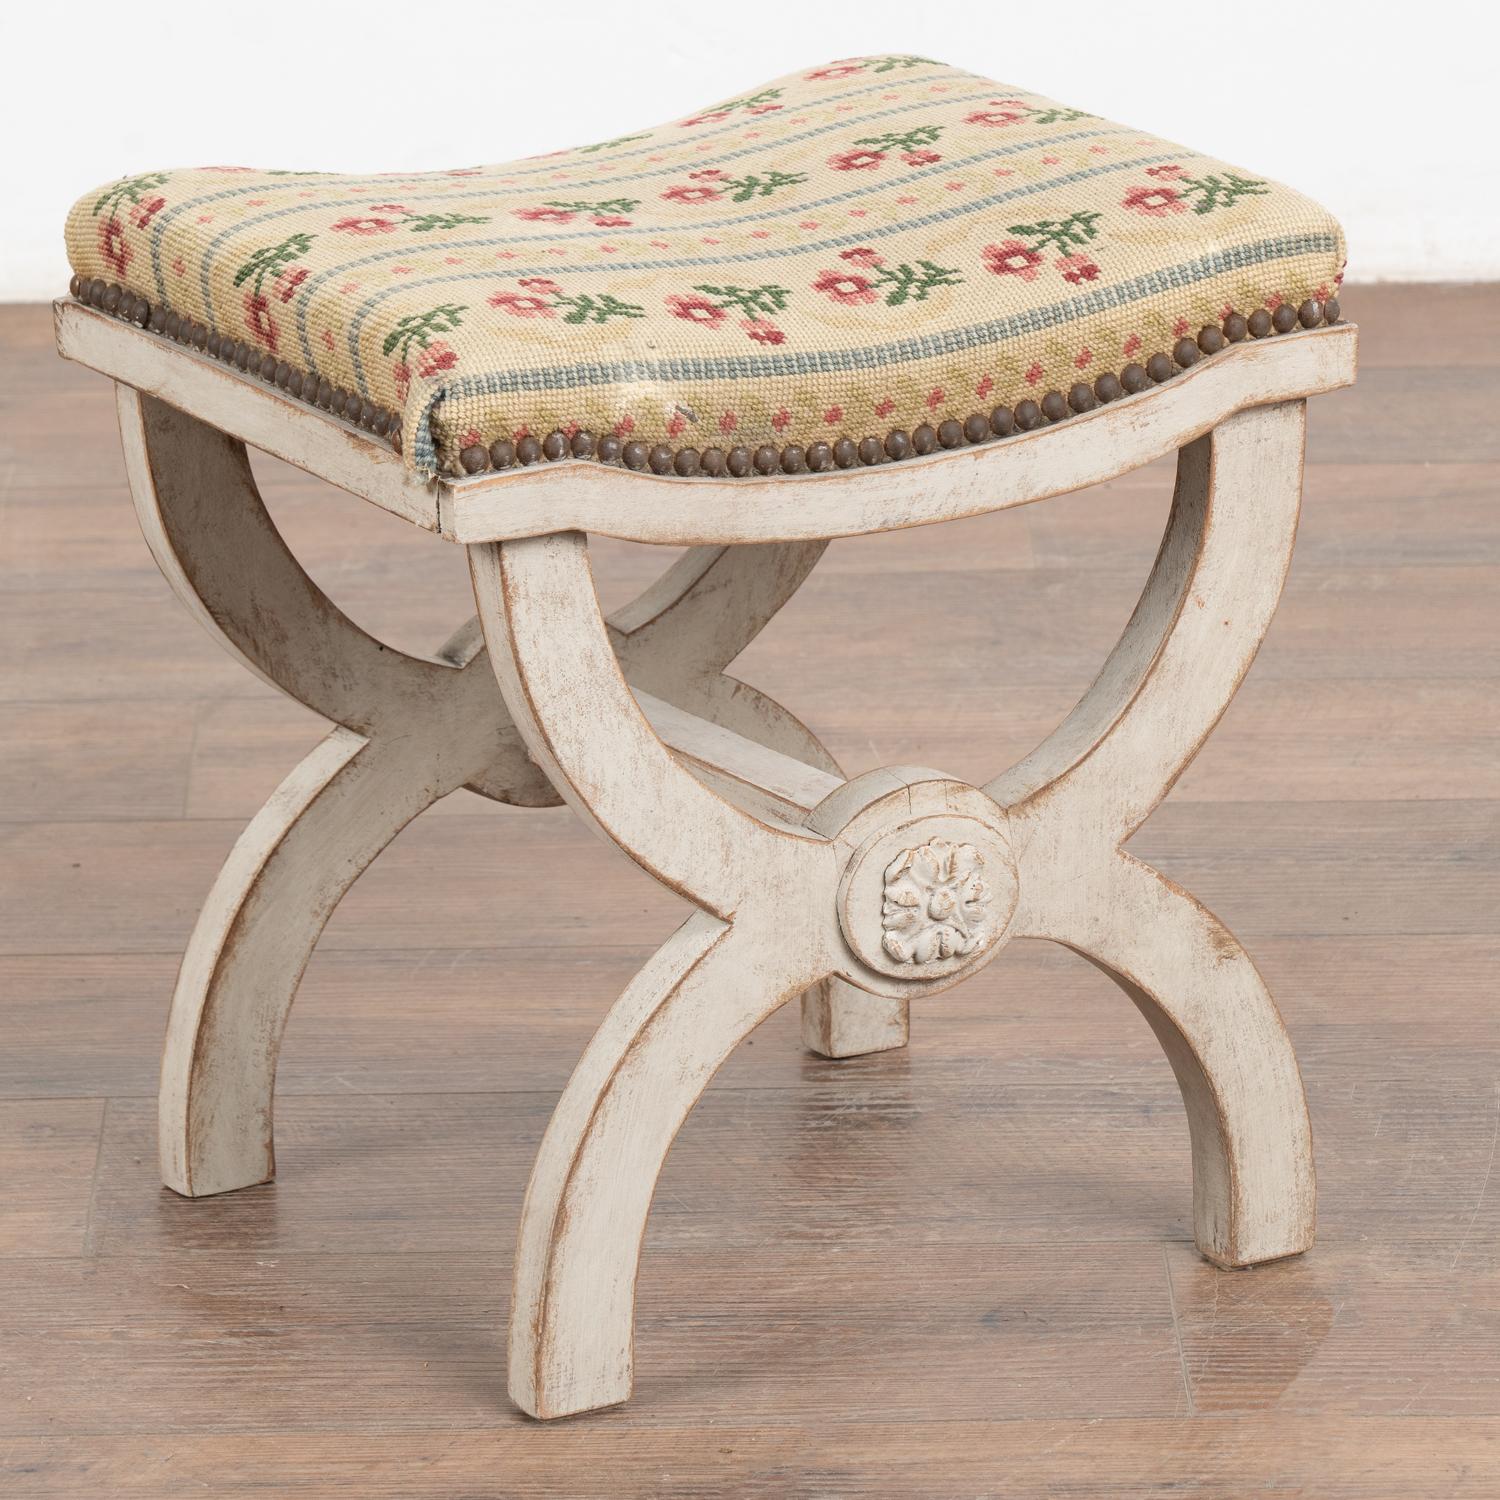 This petite Swedish stool or tabouret has a yoke shaped base with applied carved flower medallion.
The distressed patina of the later antique white painted finish adds to the charm.
This small stool or footrest still has the original worn and